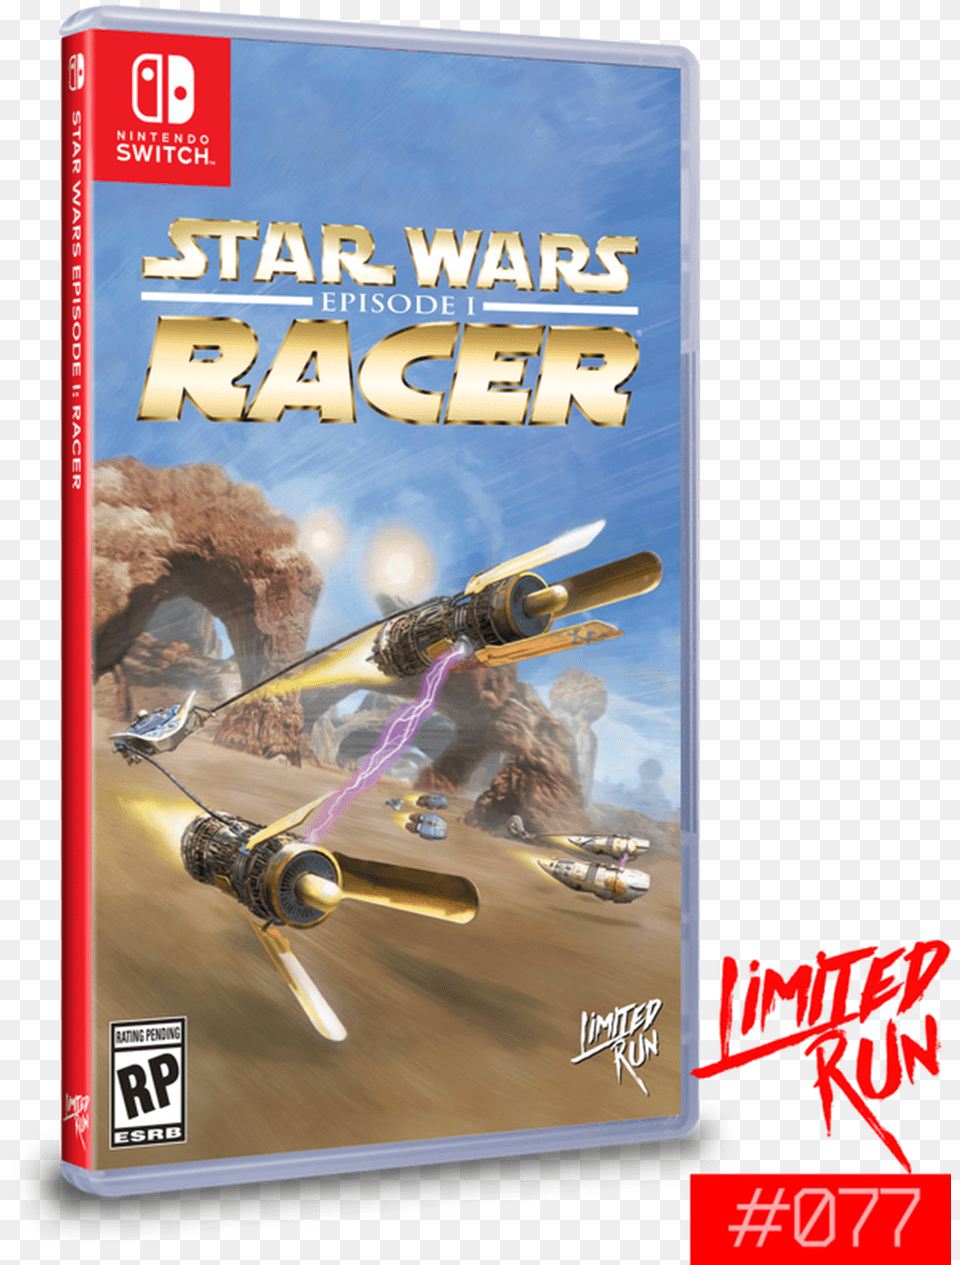 Star Wars Episode I Racer Limited Run Nintendo Switch Nintendo Switch Star Wars Racer, Book, Publication, Aircraft, Airplane Free Transparent Png